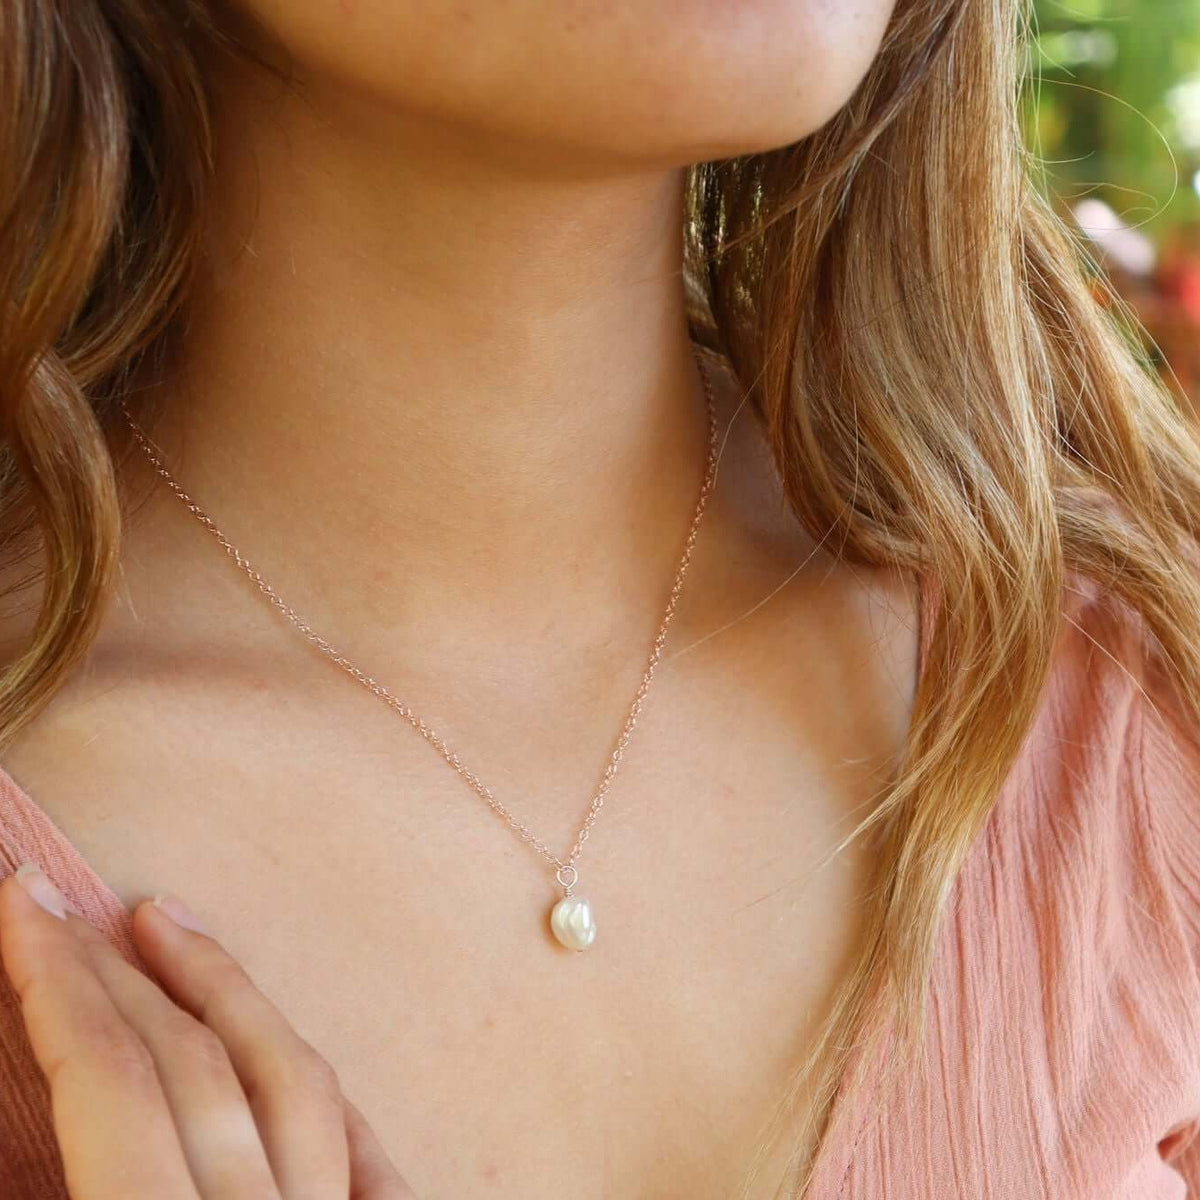 Raw Crystal Pendant Necklace - Freshwater Pearl - 14K Rose Gold Fill - Luna Tide Handmade Jewellery